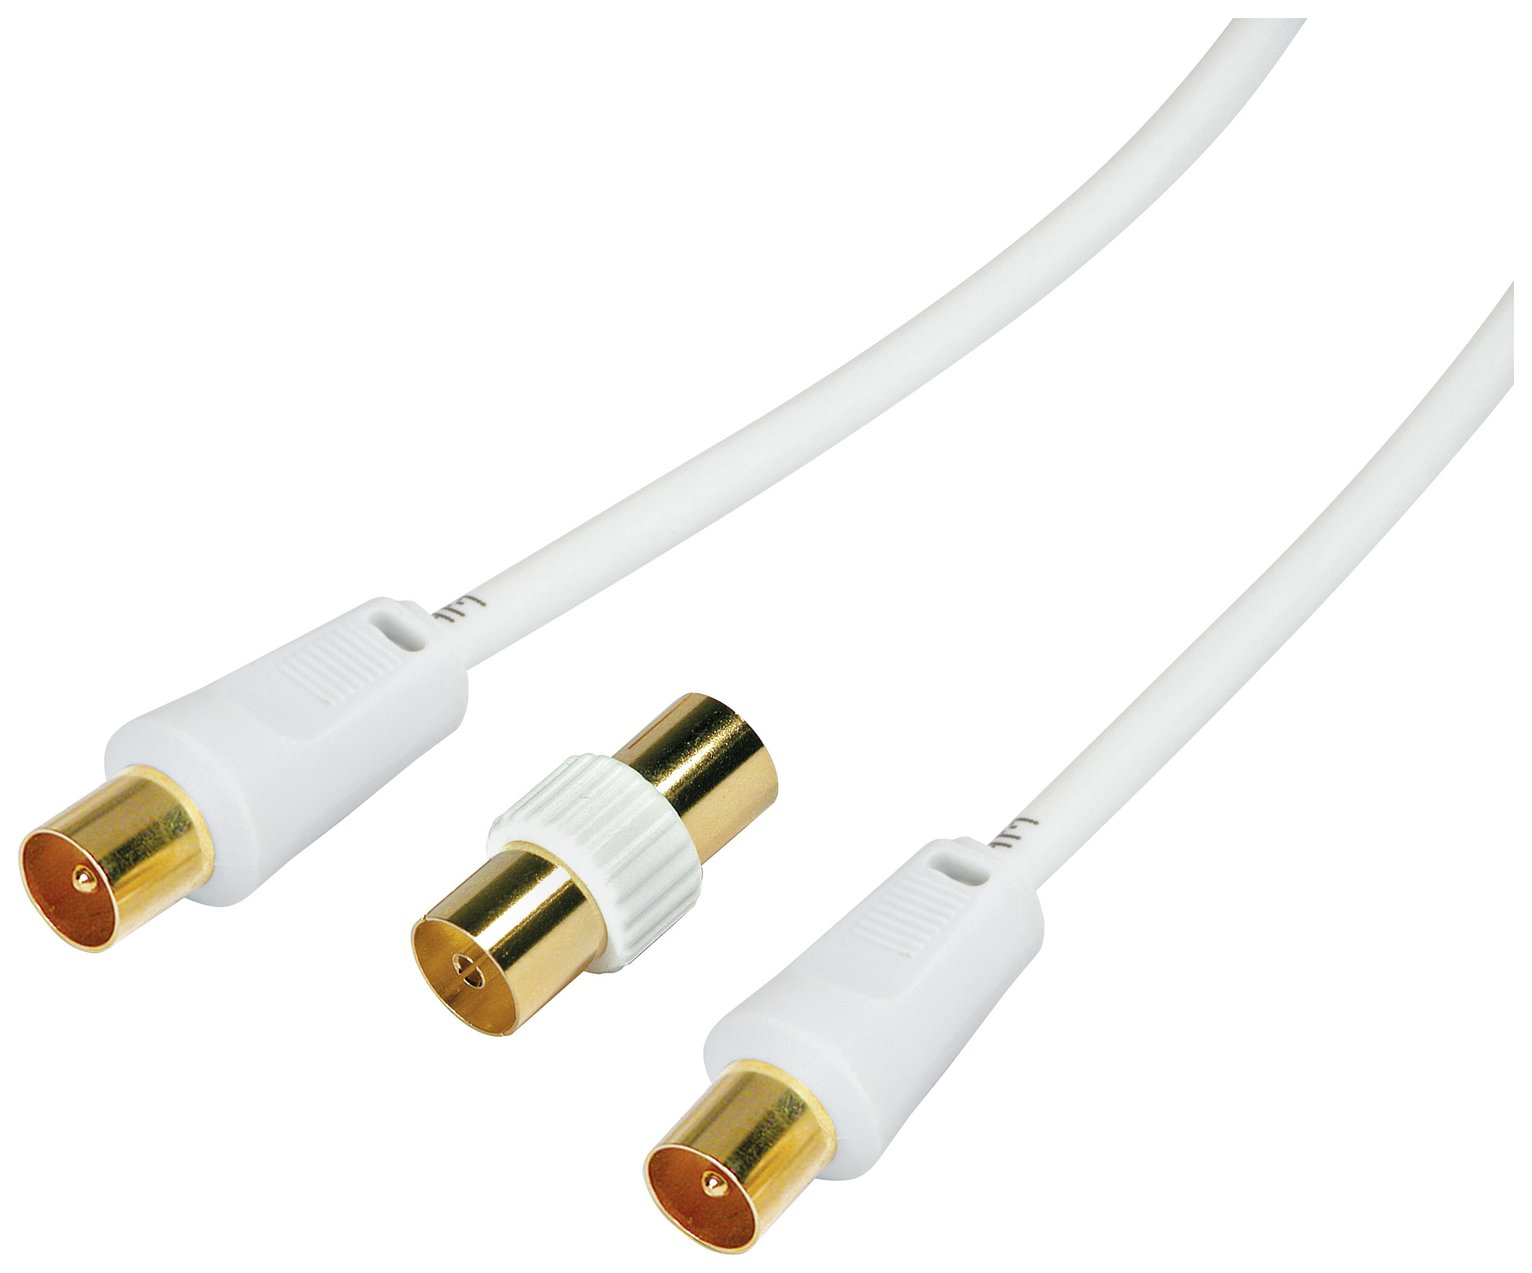 4m Aerial Extension Lead - White